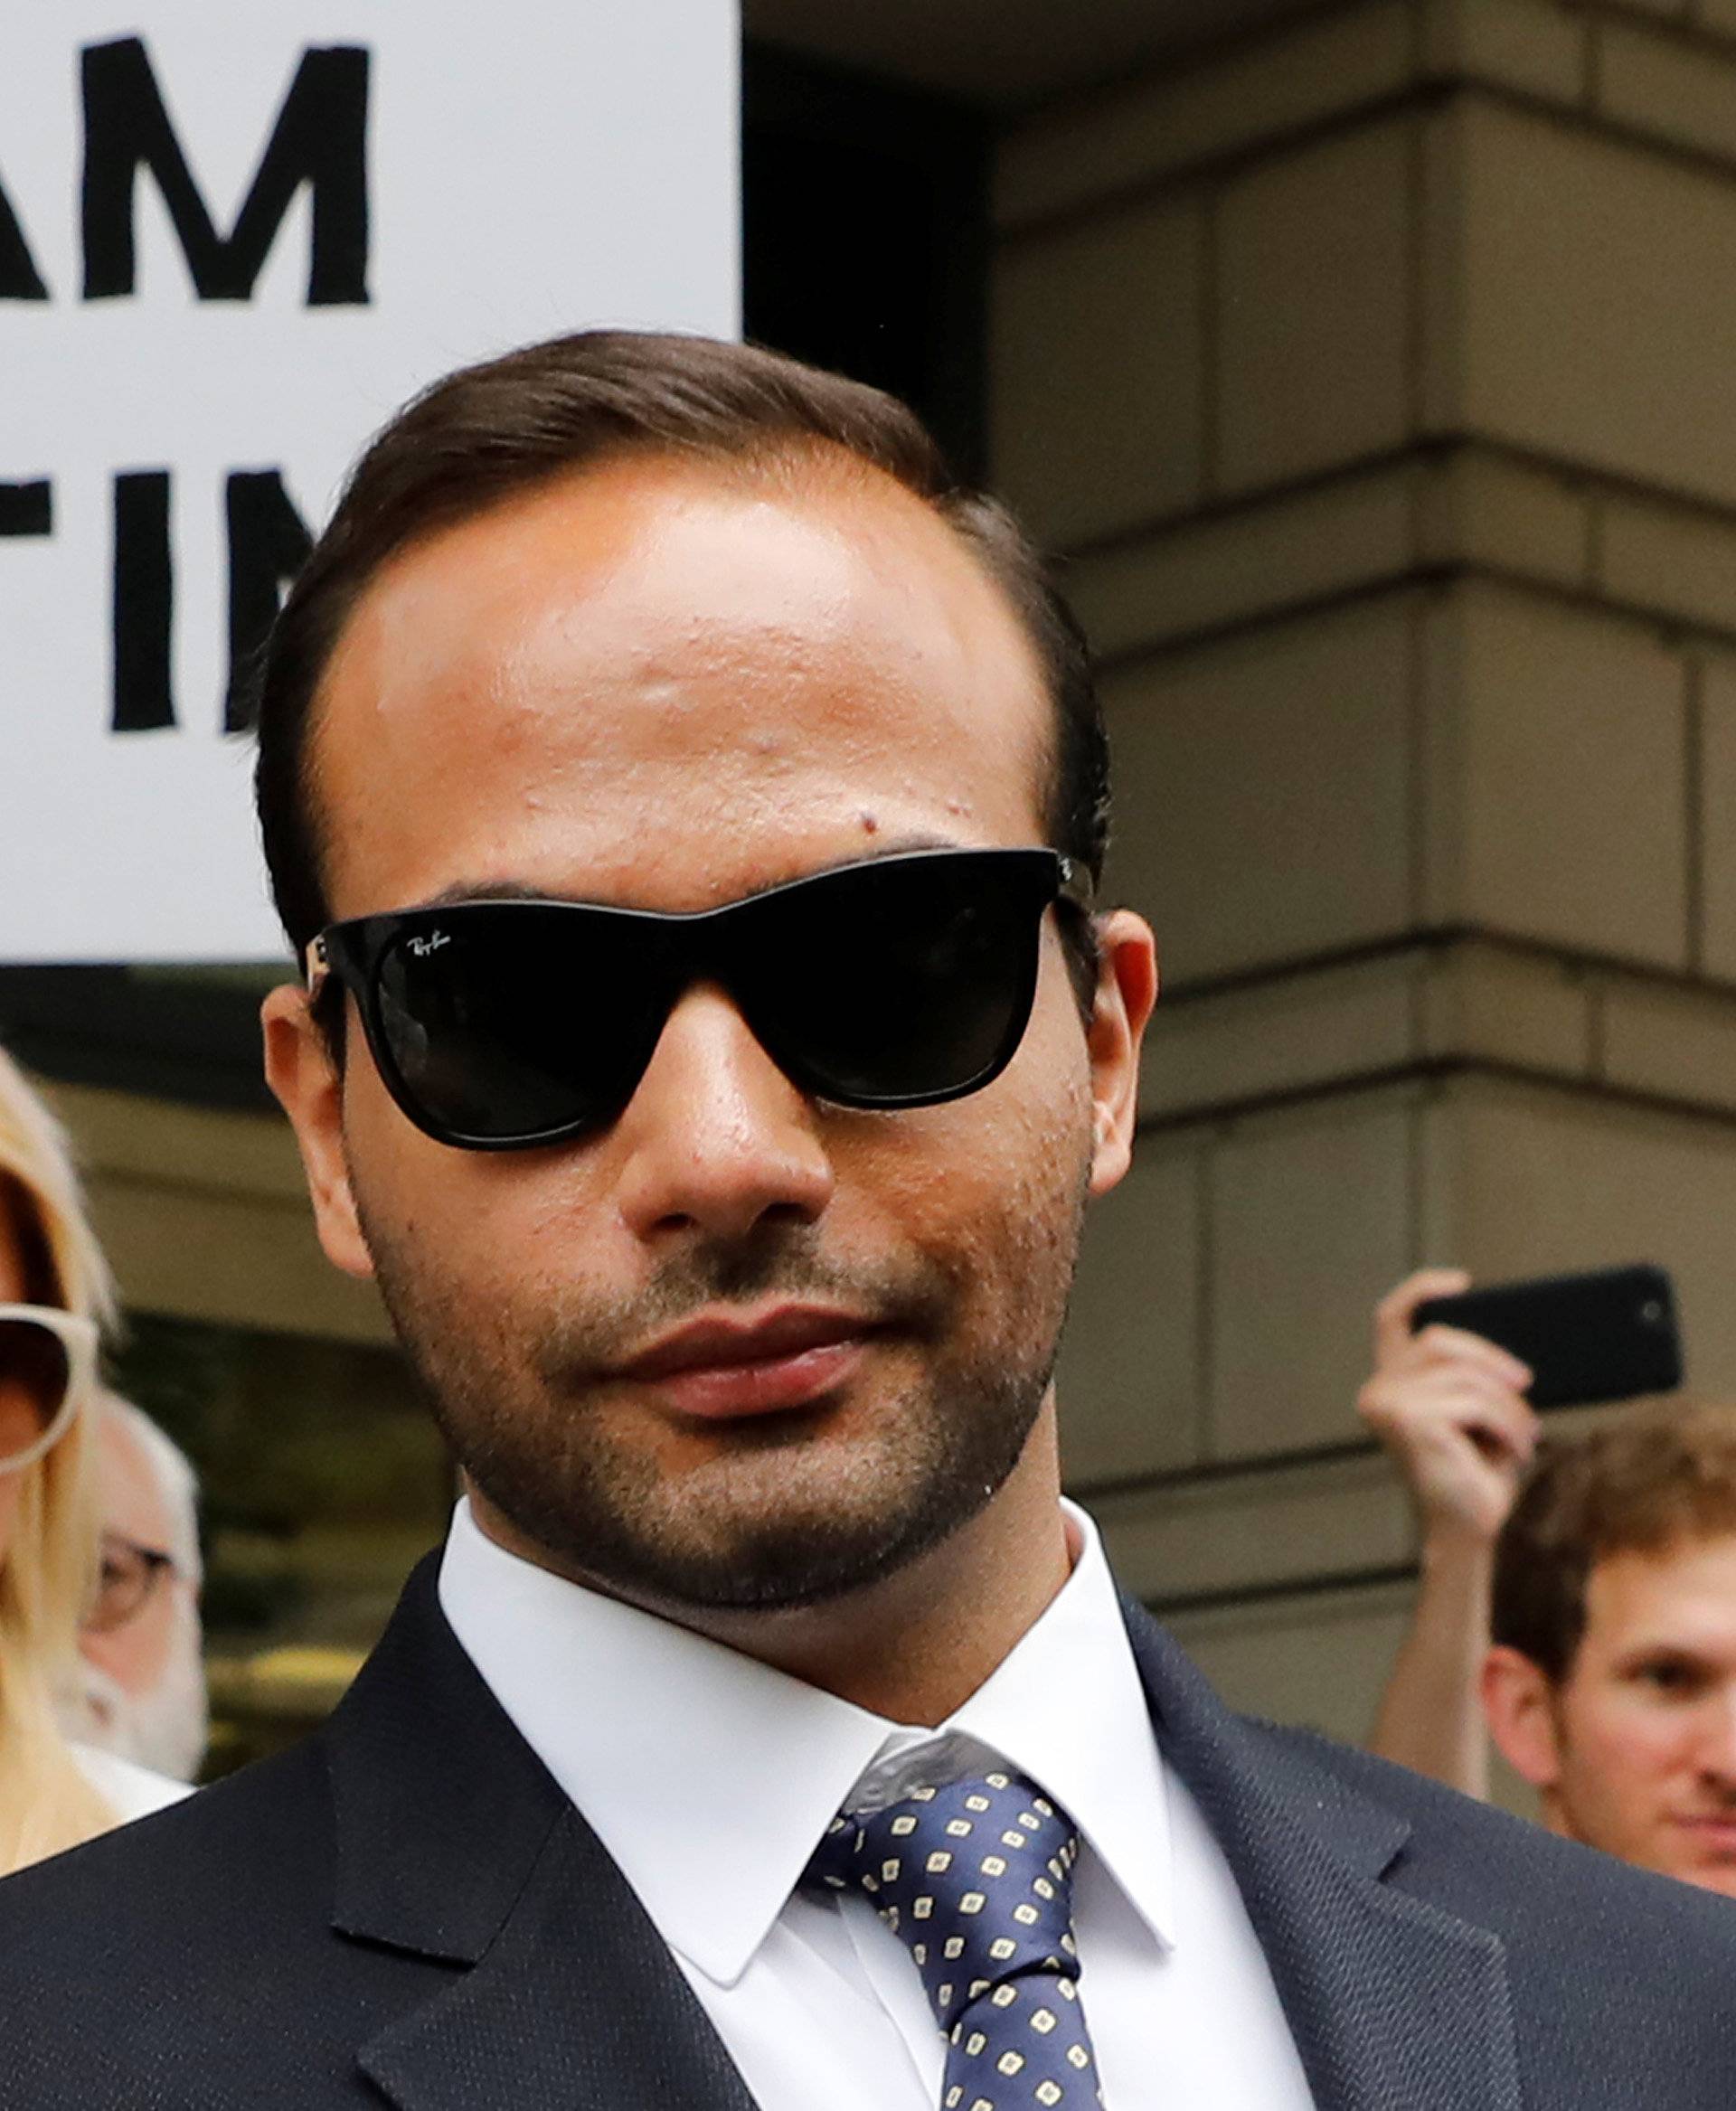 George Papadopoulos leaves U.S. District Court in Washington